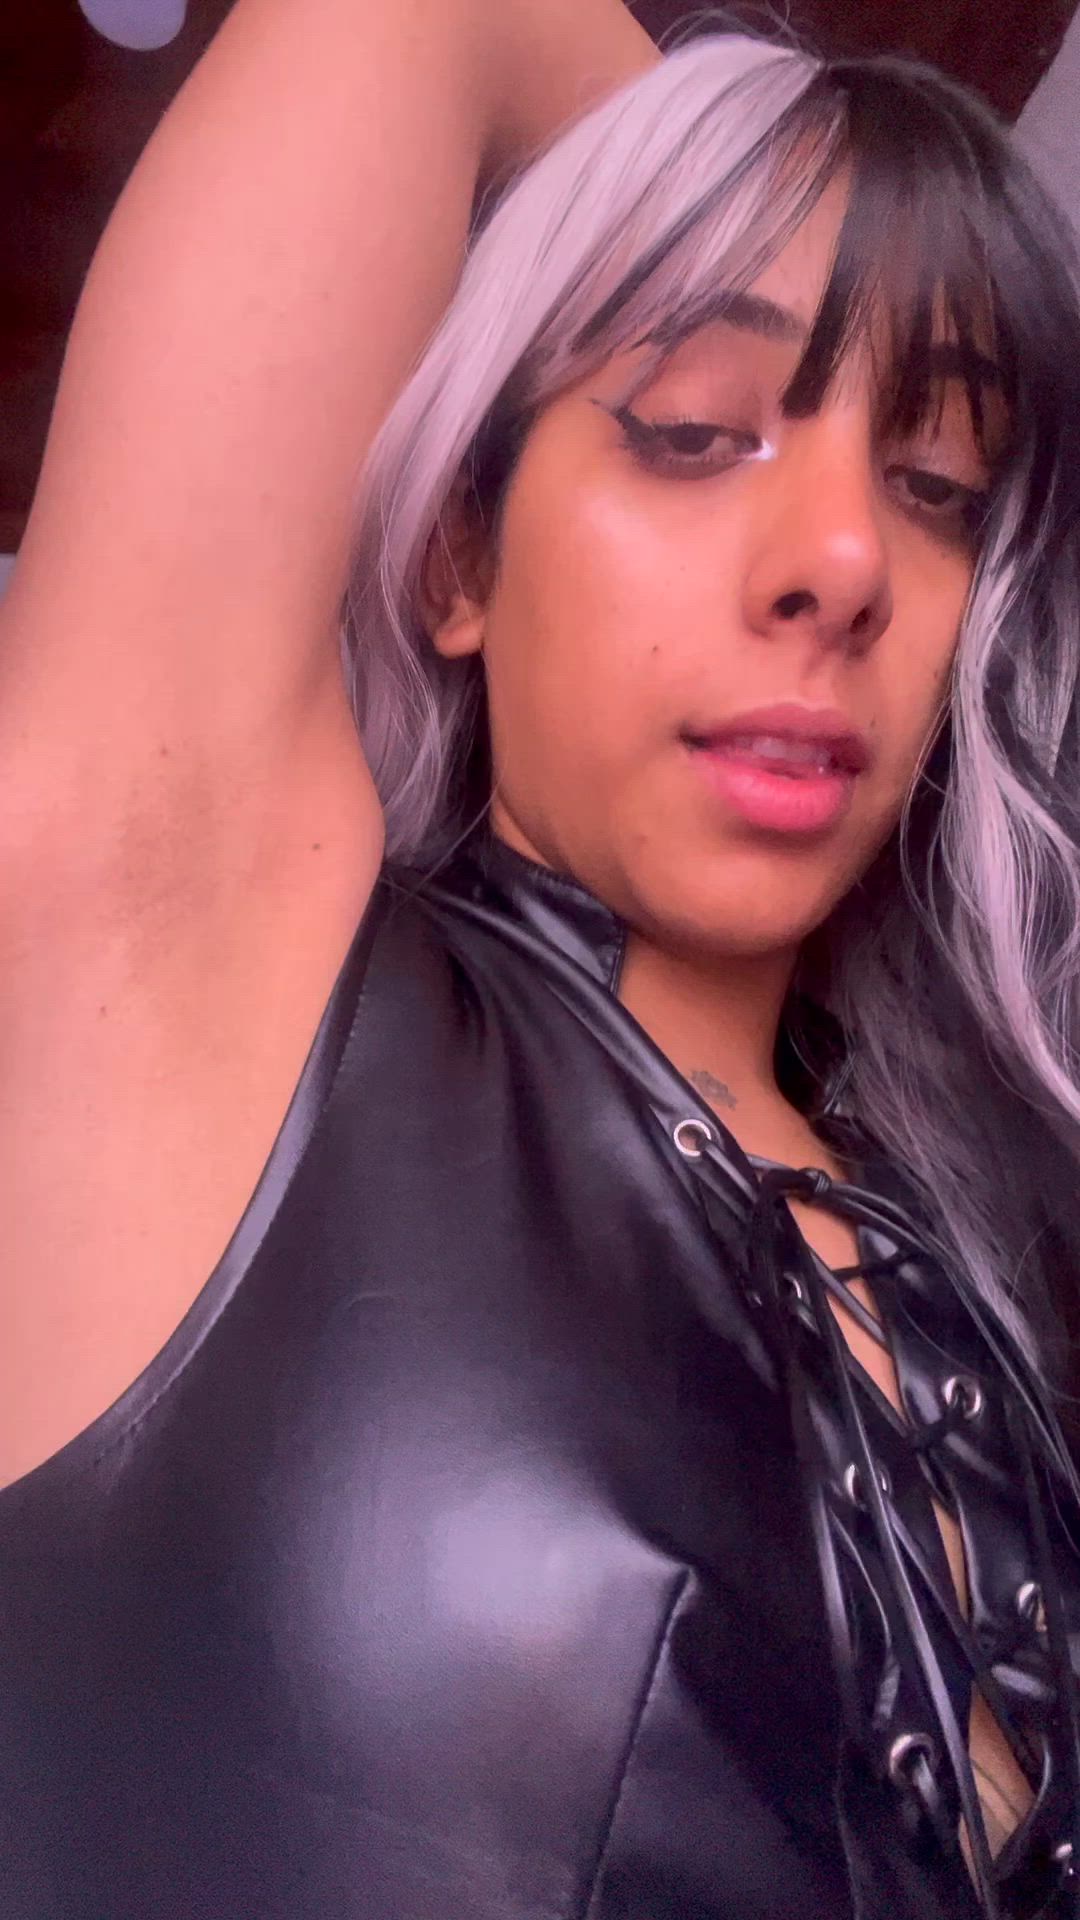 Teen porn video with onlyfans model carlita15 <strong>@dulcesalcedo</strong>